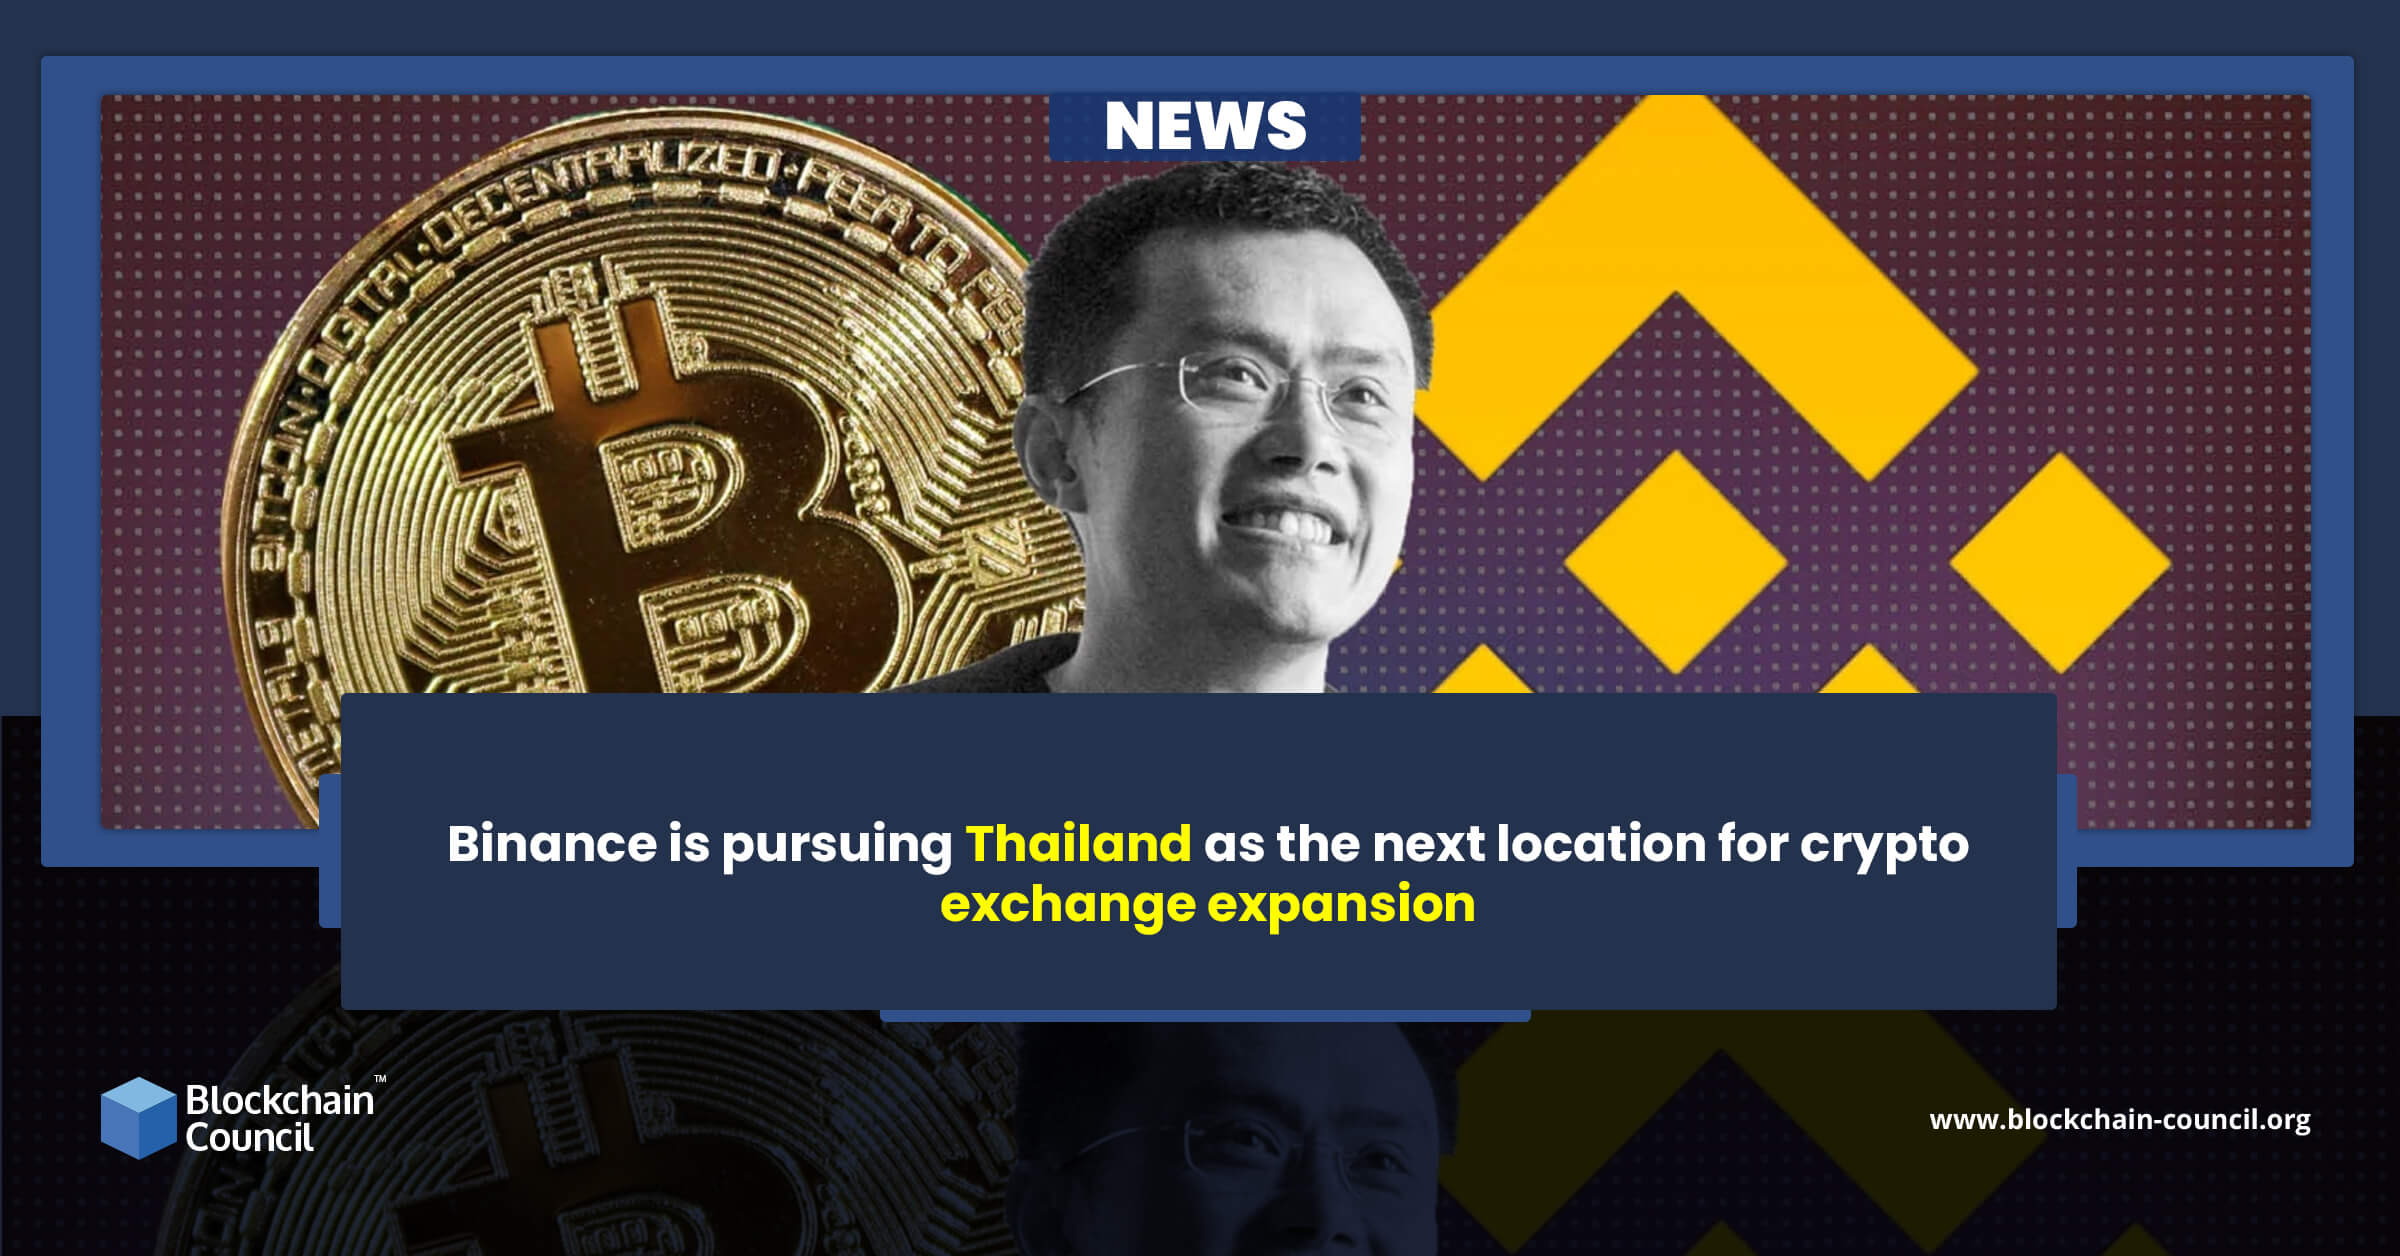 Binance is pursuing Thailand as the next location for crypto exchange expansion